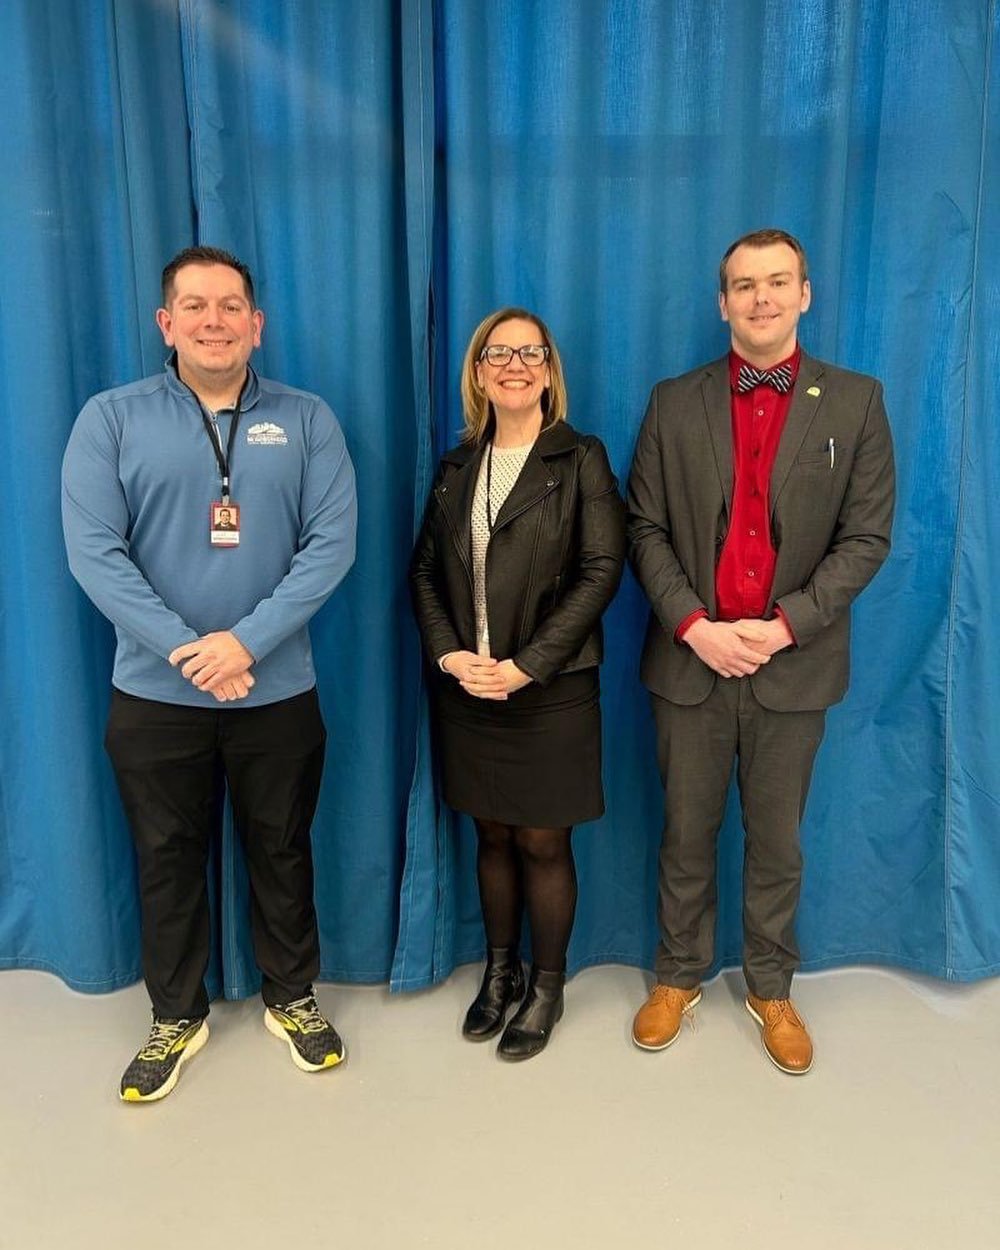 🌟 Our President was honored to stand alongside Seth Prentice, @followarmstrong, and Annie Mersing of @senecavalleysd as judges for the Seneca Valley School District CIRC program! 👩&zwj;🏫

Seneca Valley partnered with Pittsburgh-based @inventionlan